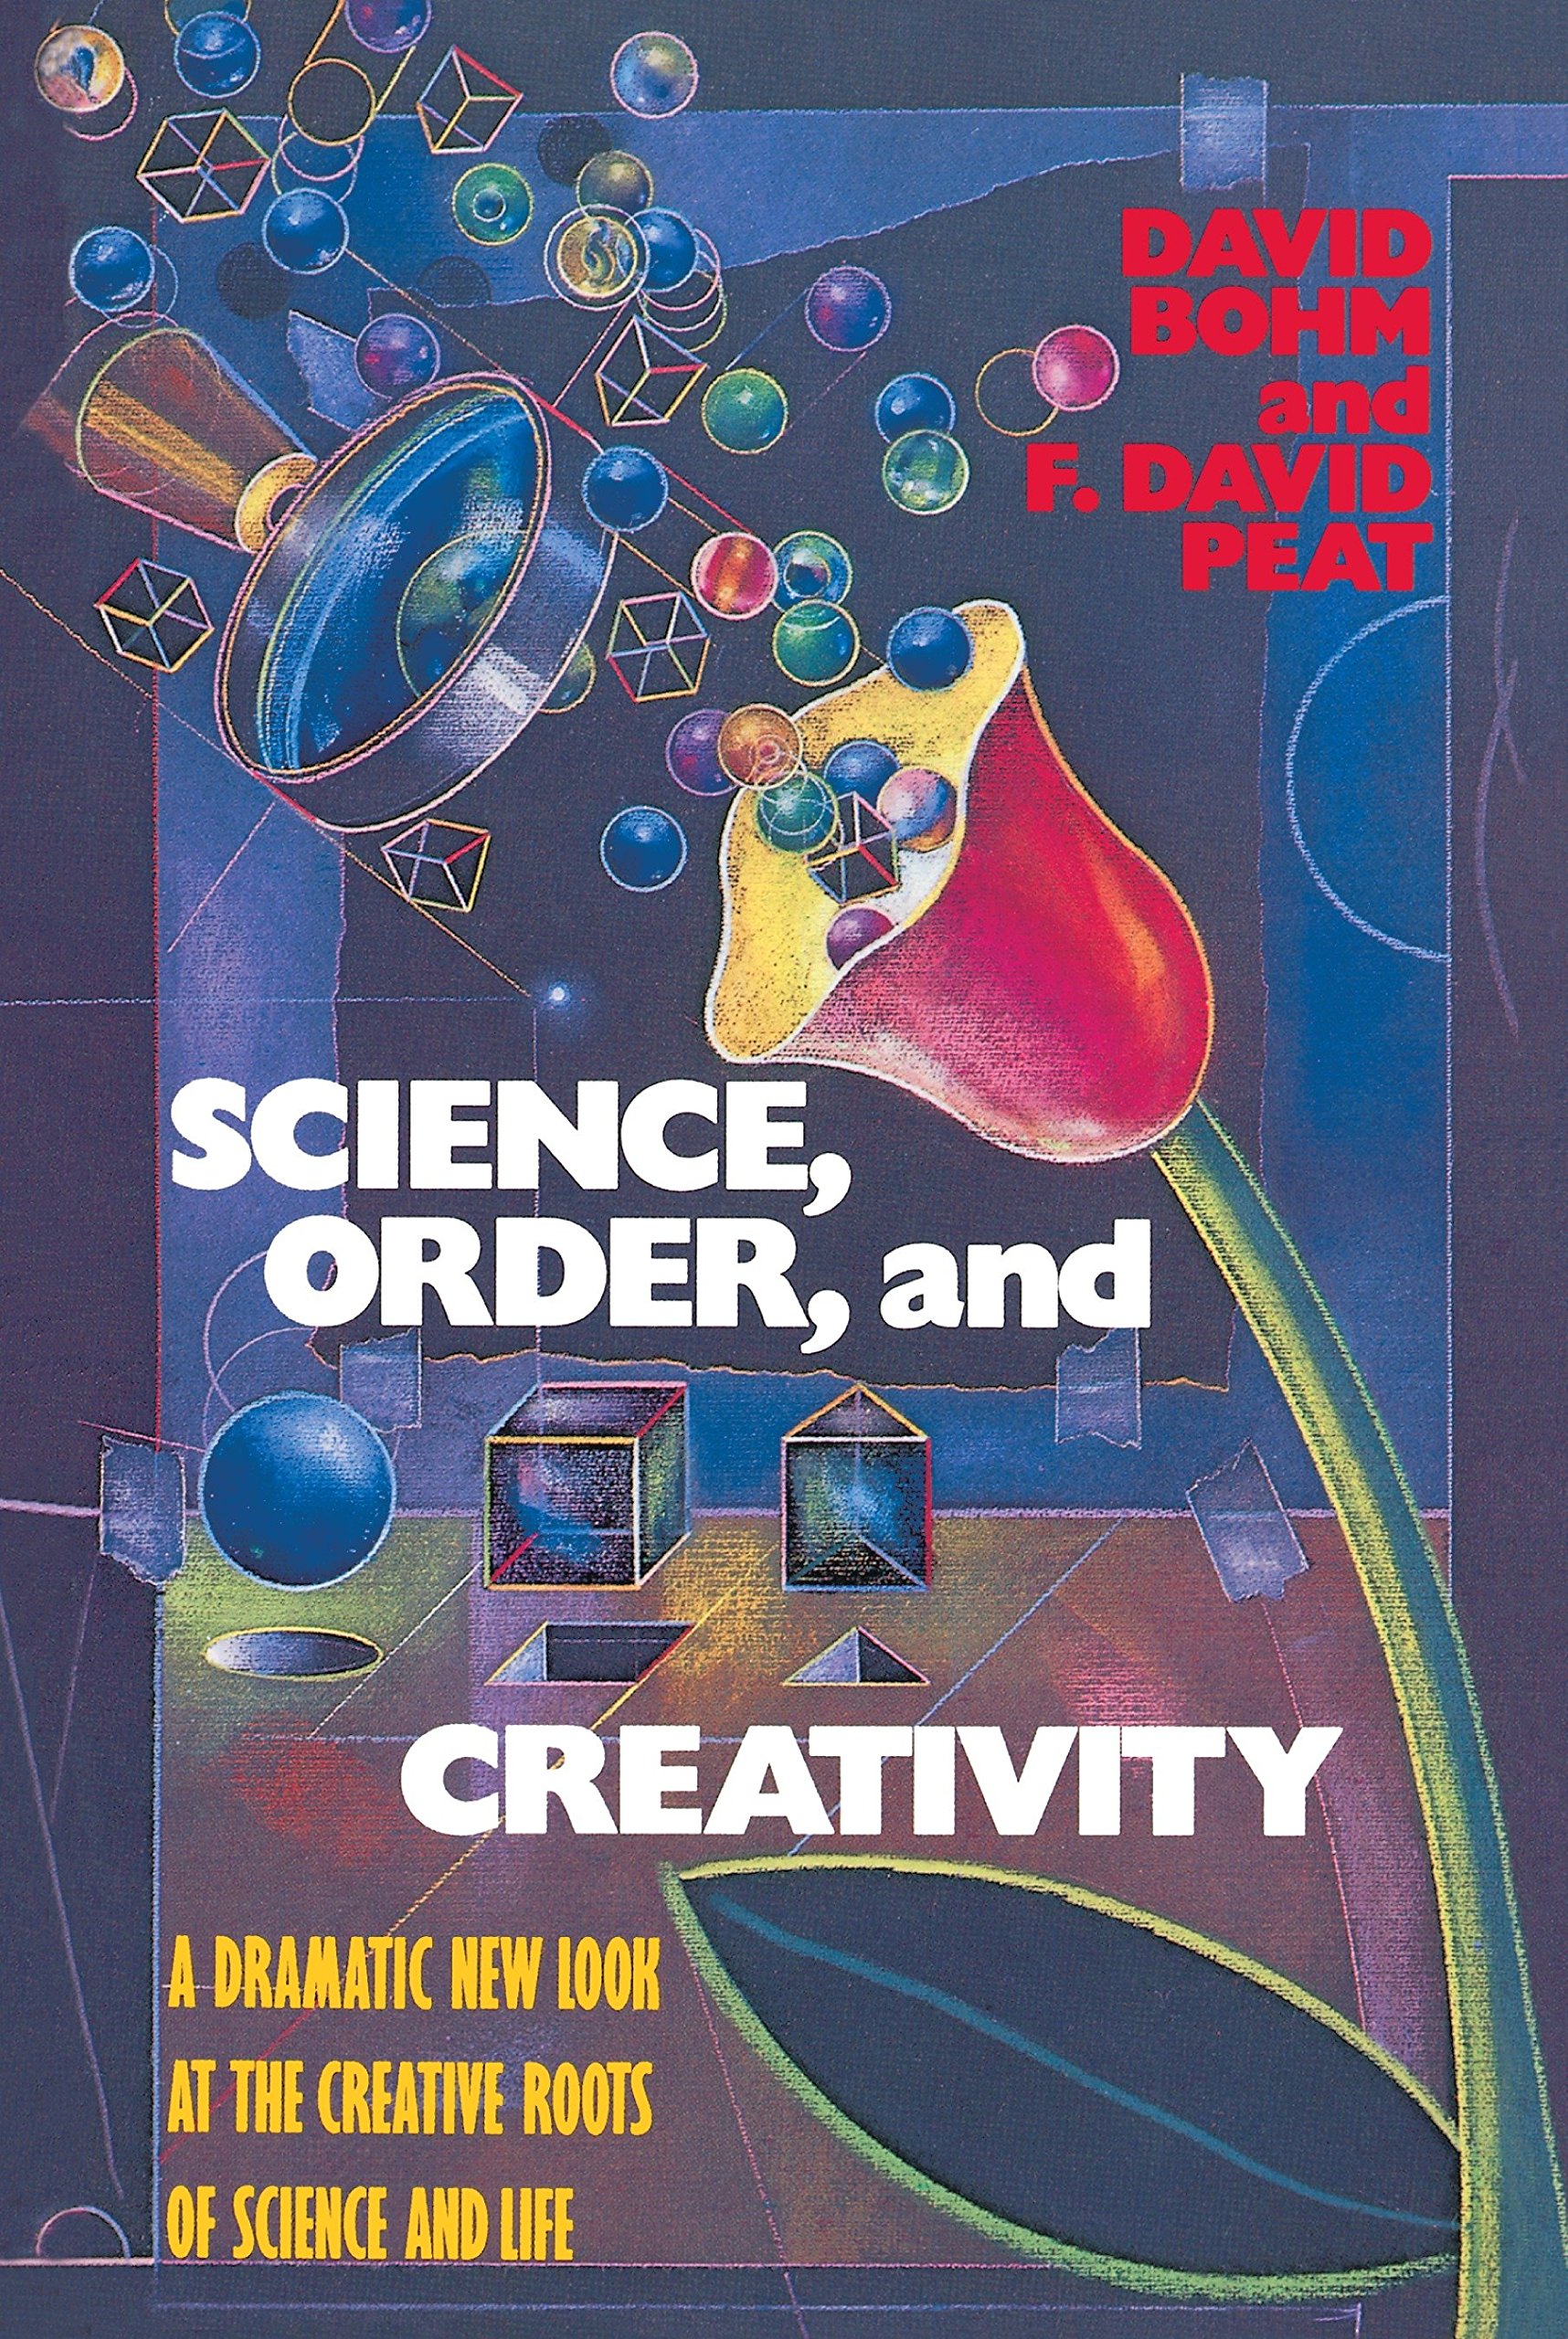 Science, order, and creativity by David bohm and F. David Peat